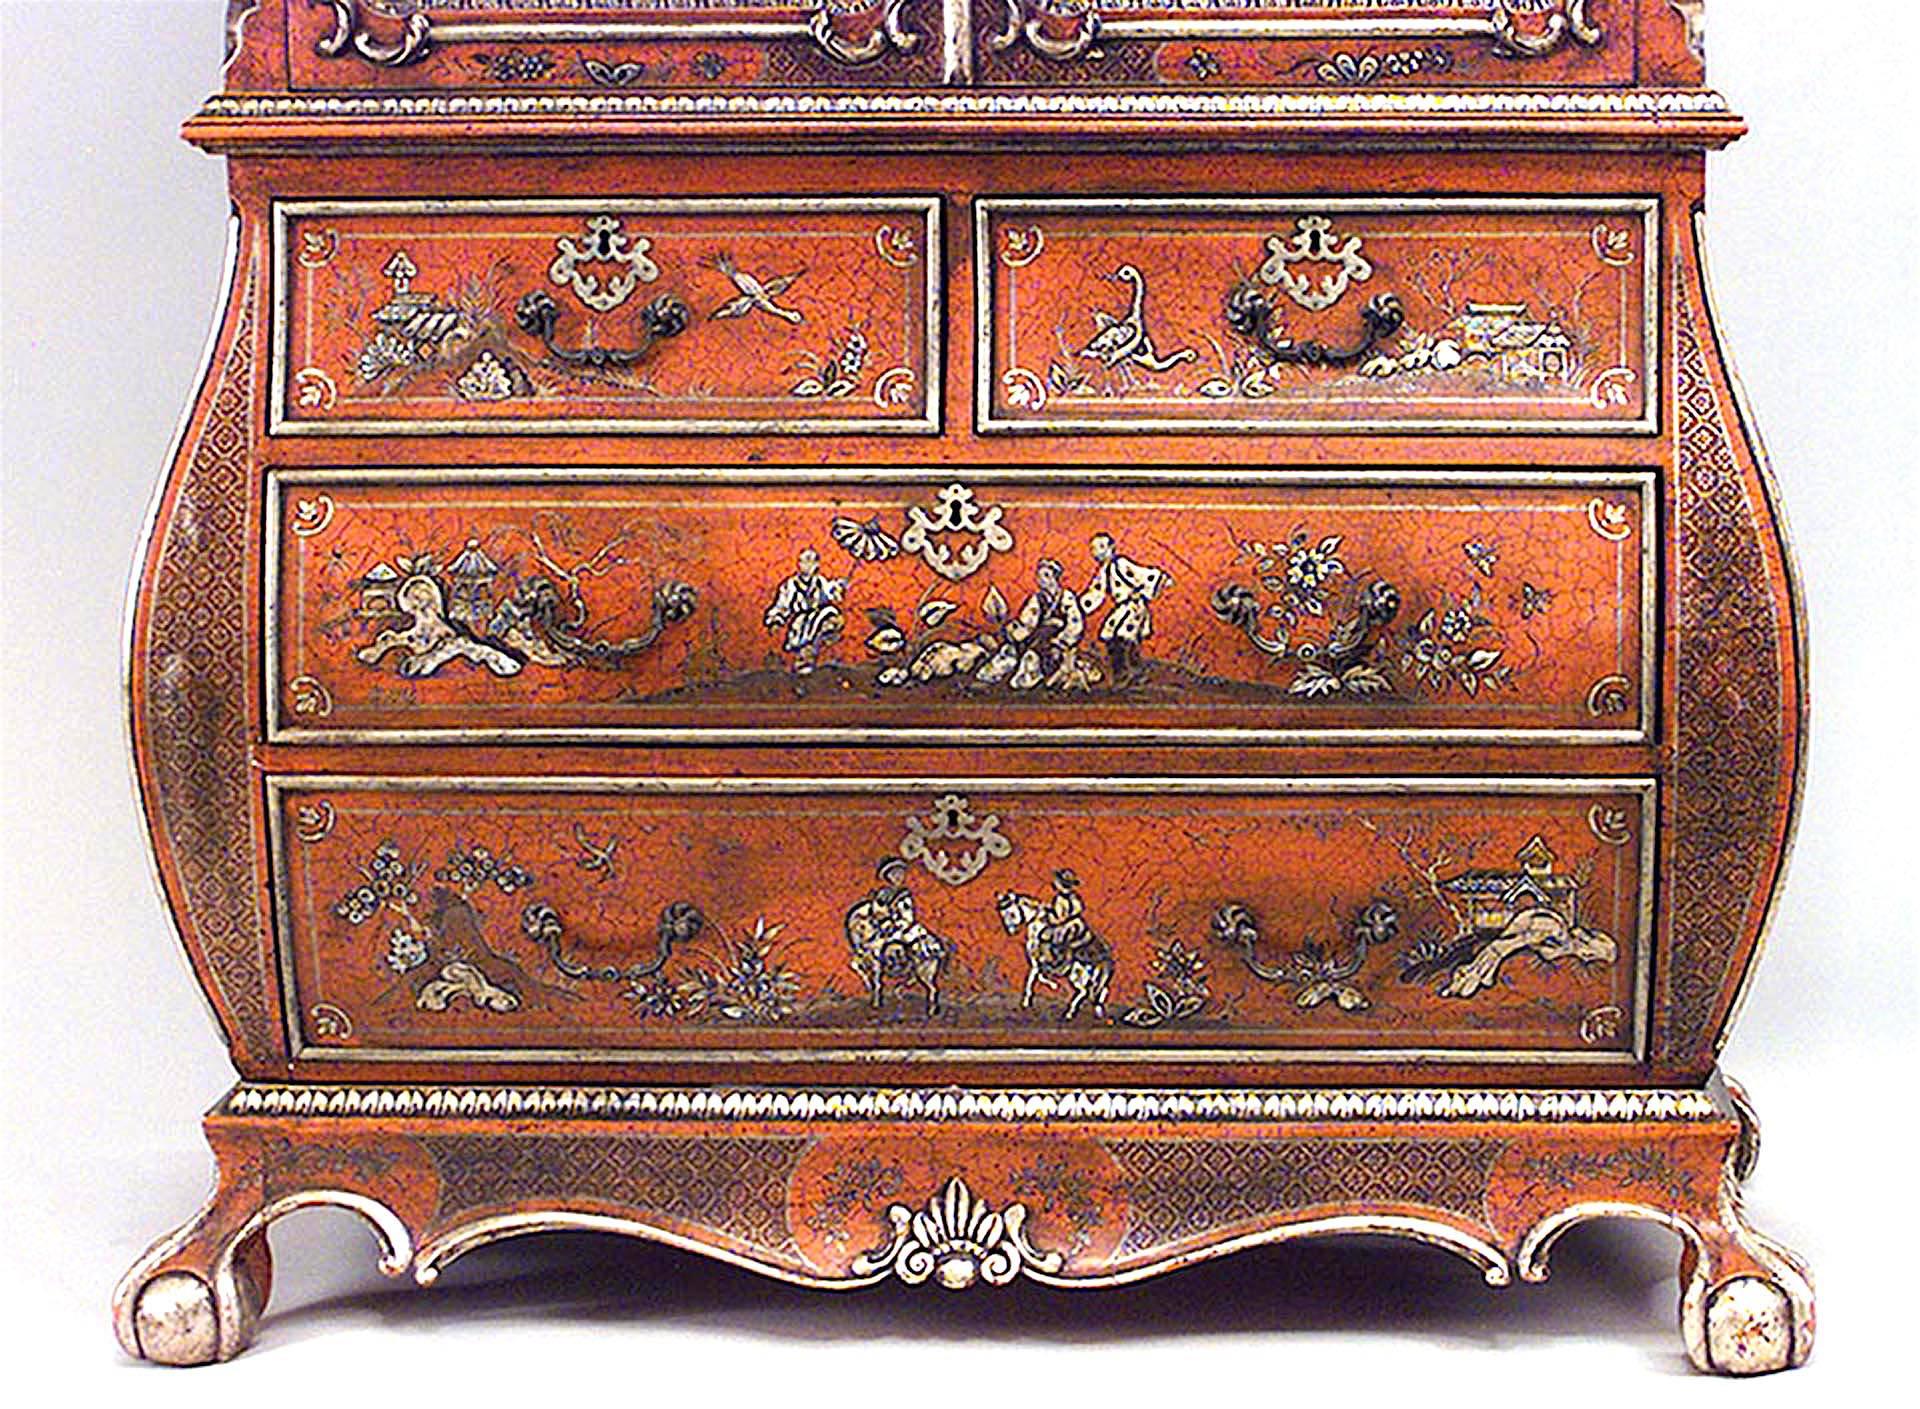 English Georgian-style (19/20th Century) red lacquered chinoiserie design cabinet with bombe shaped base with drawers and 2 glass doors on upper section.
